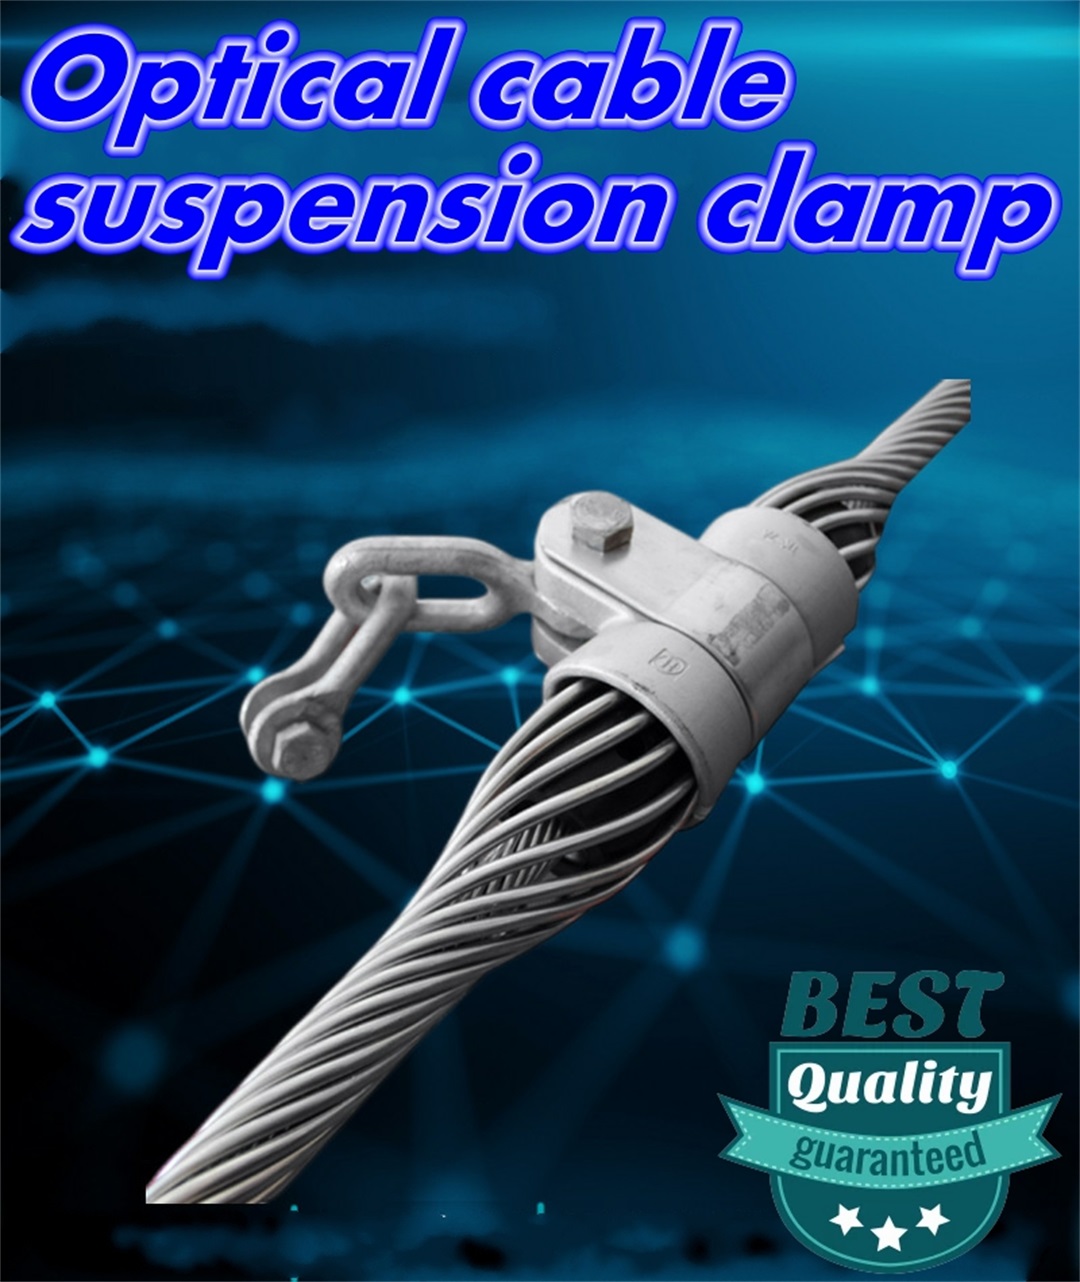 Pre-twisted optical cable suspension clamp